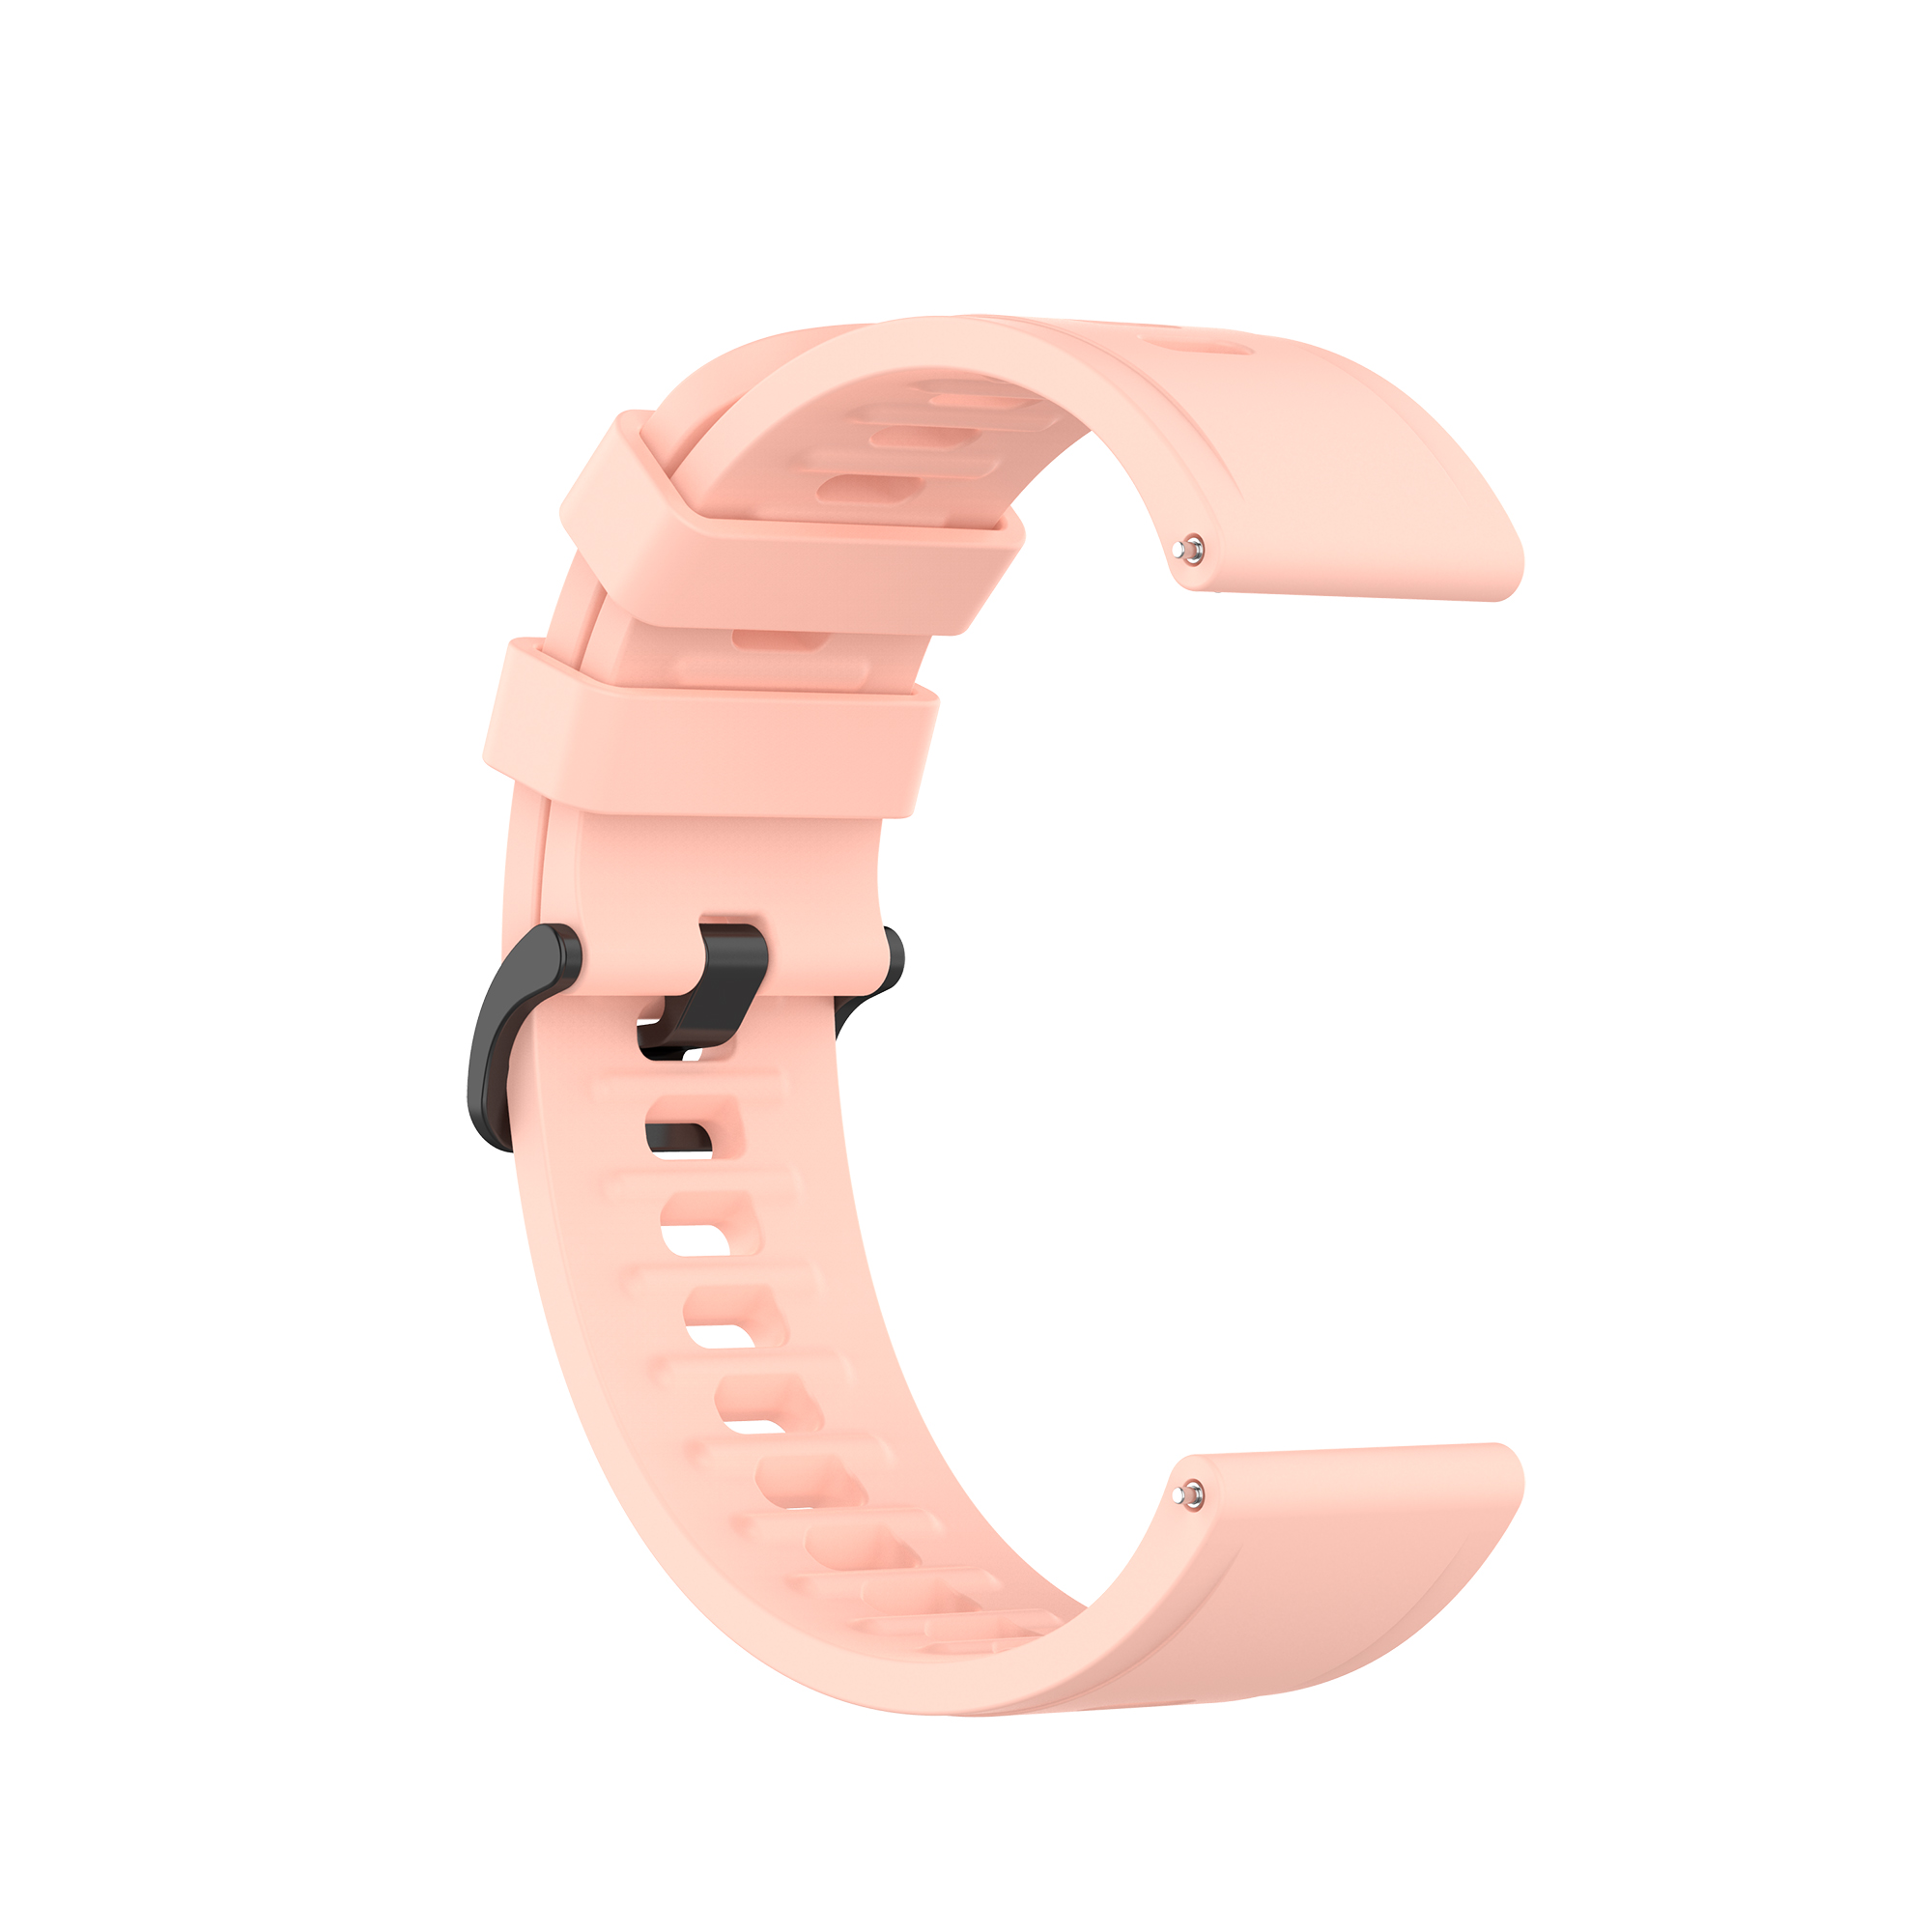 Bakeey-2022mm-Pure-Color-Sweatproof-Soft-Silicone-Watch-Band-Strap-Replacement-for-Garmin-Vivowatch-1773645-19